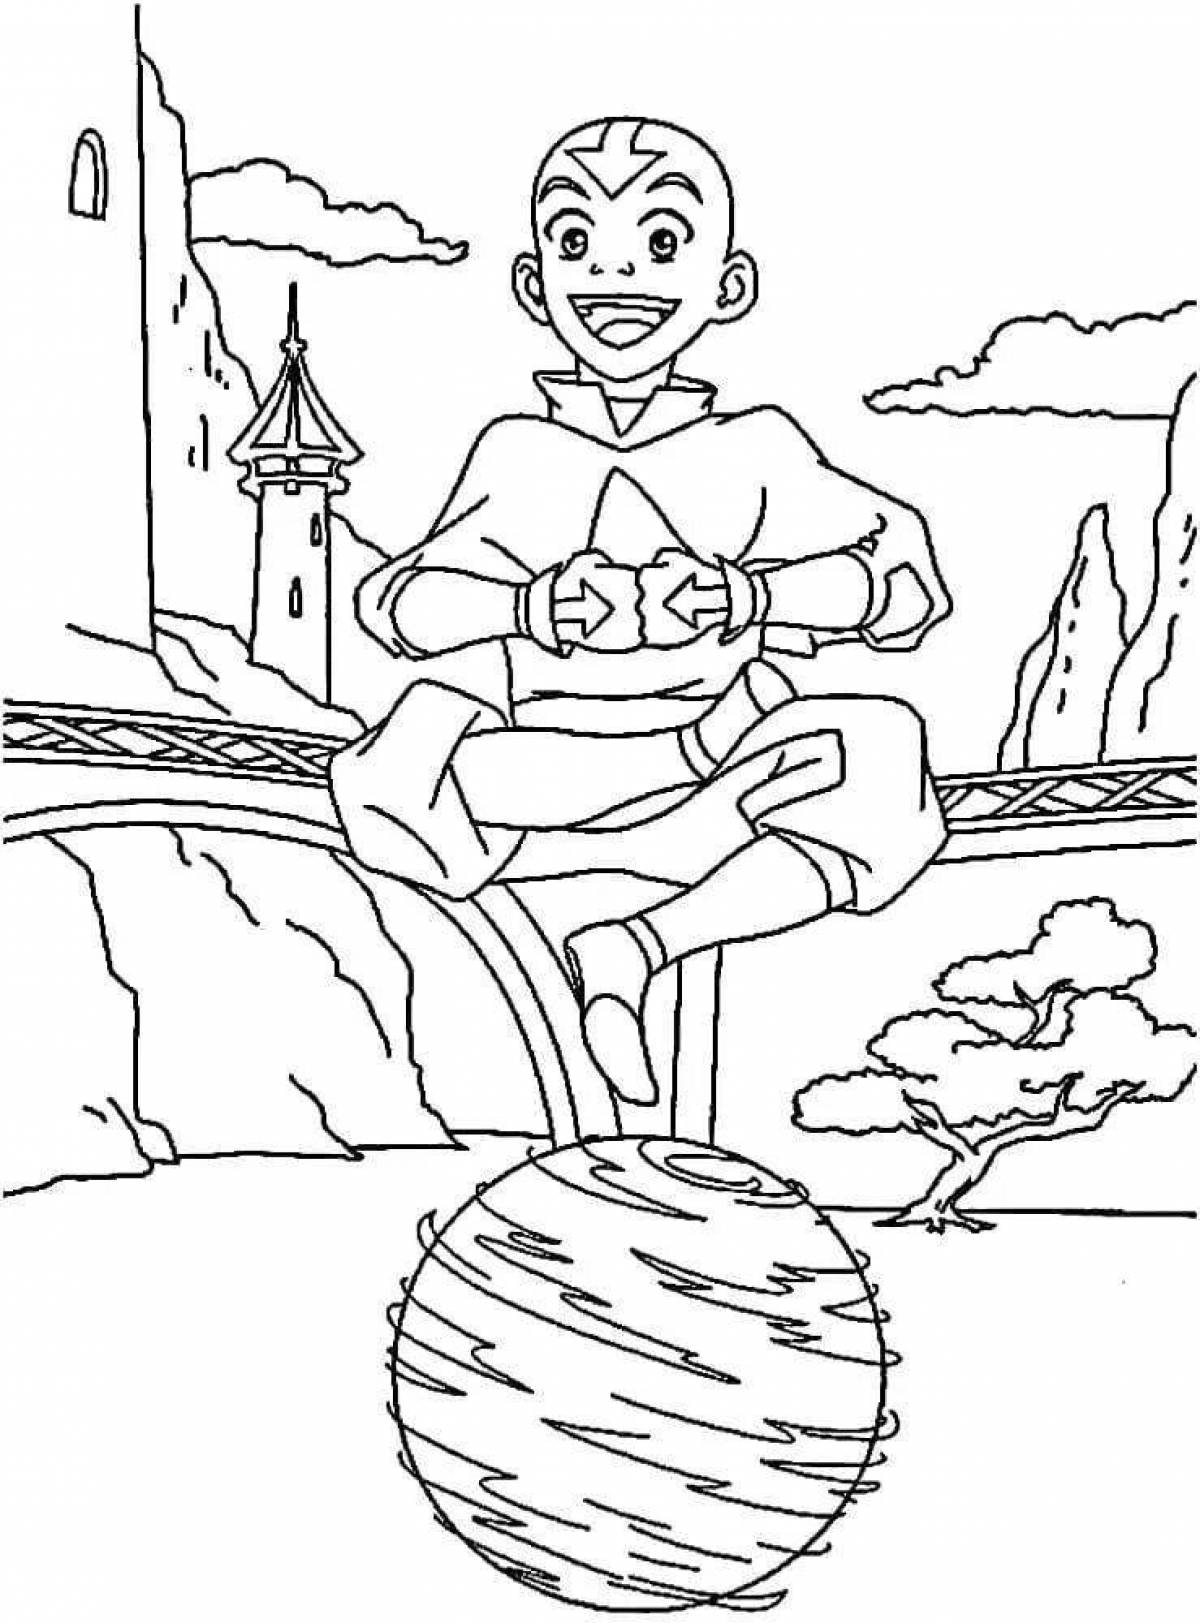 The Last Airbender Avatar Coloring Page